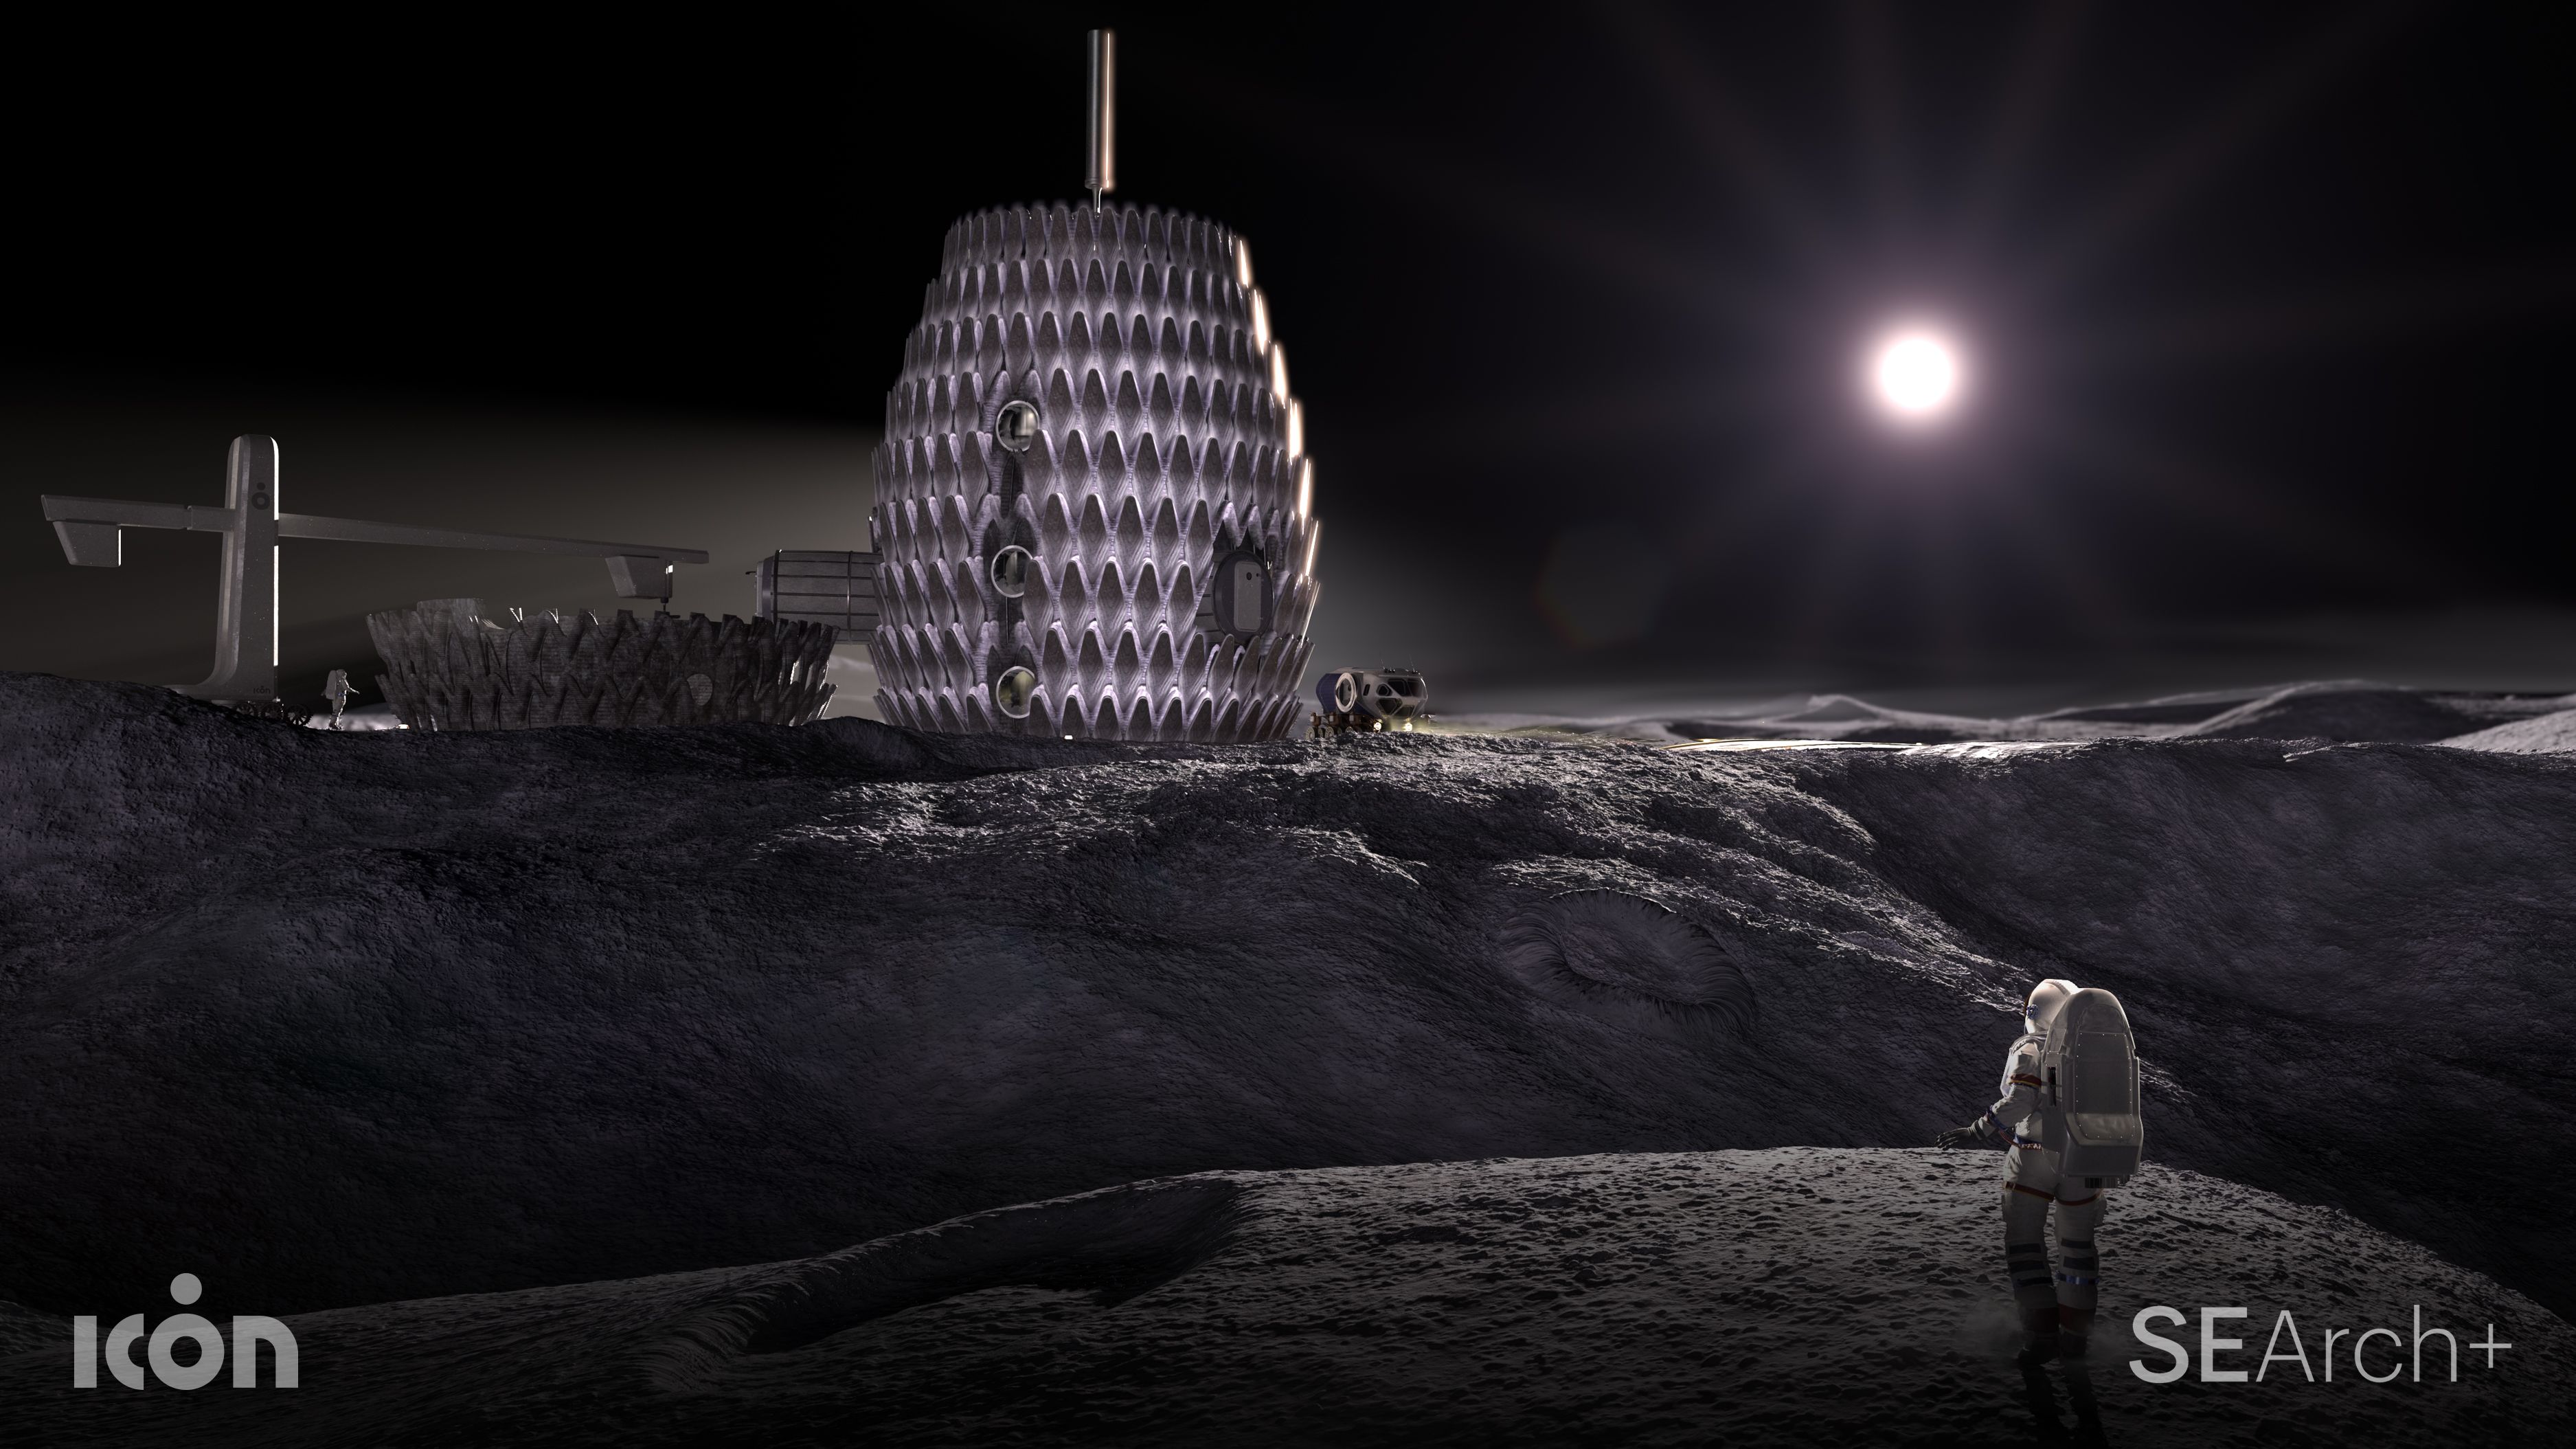 NASA wants to build a lunar base by 2030. Could 3D printing with moon dust  be the answer?